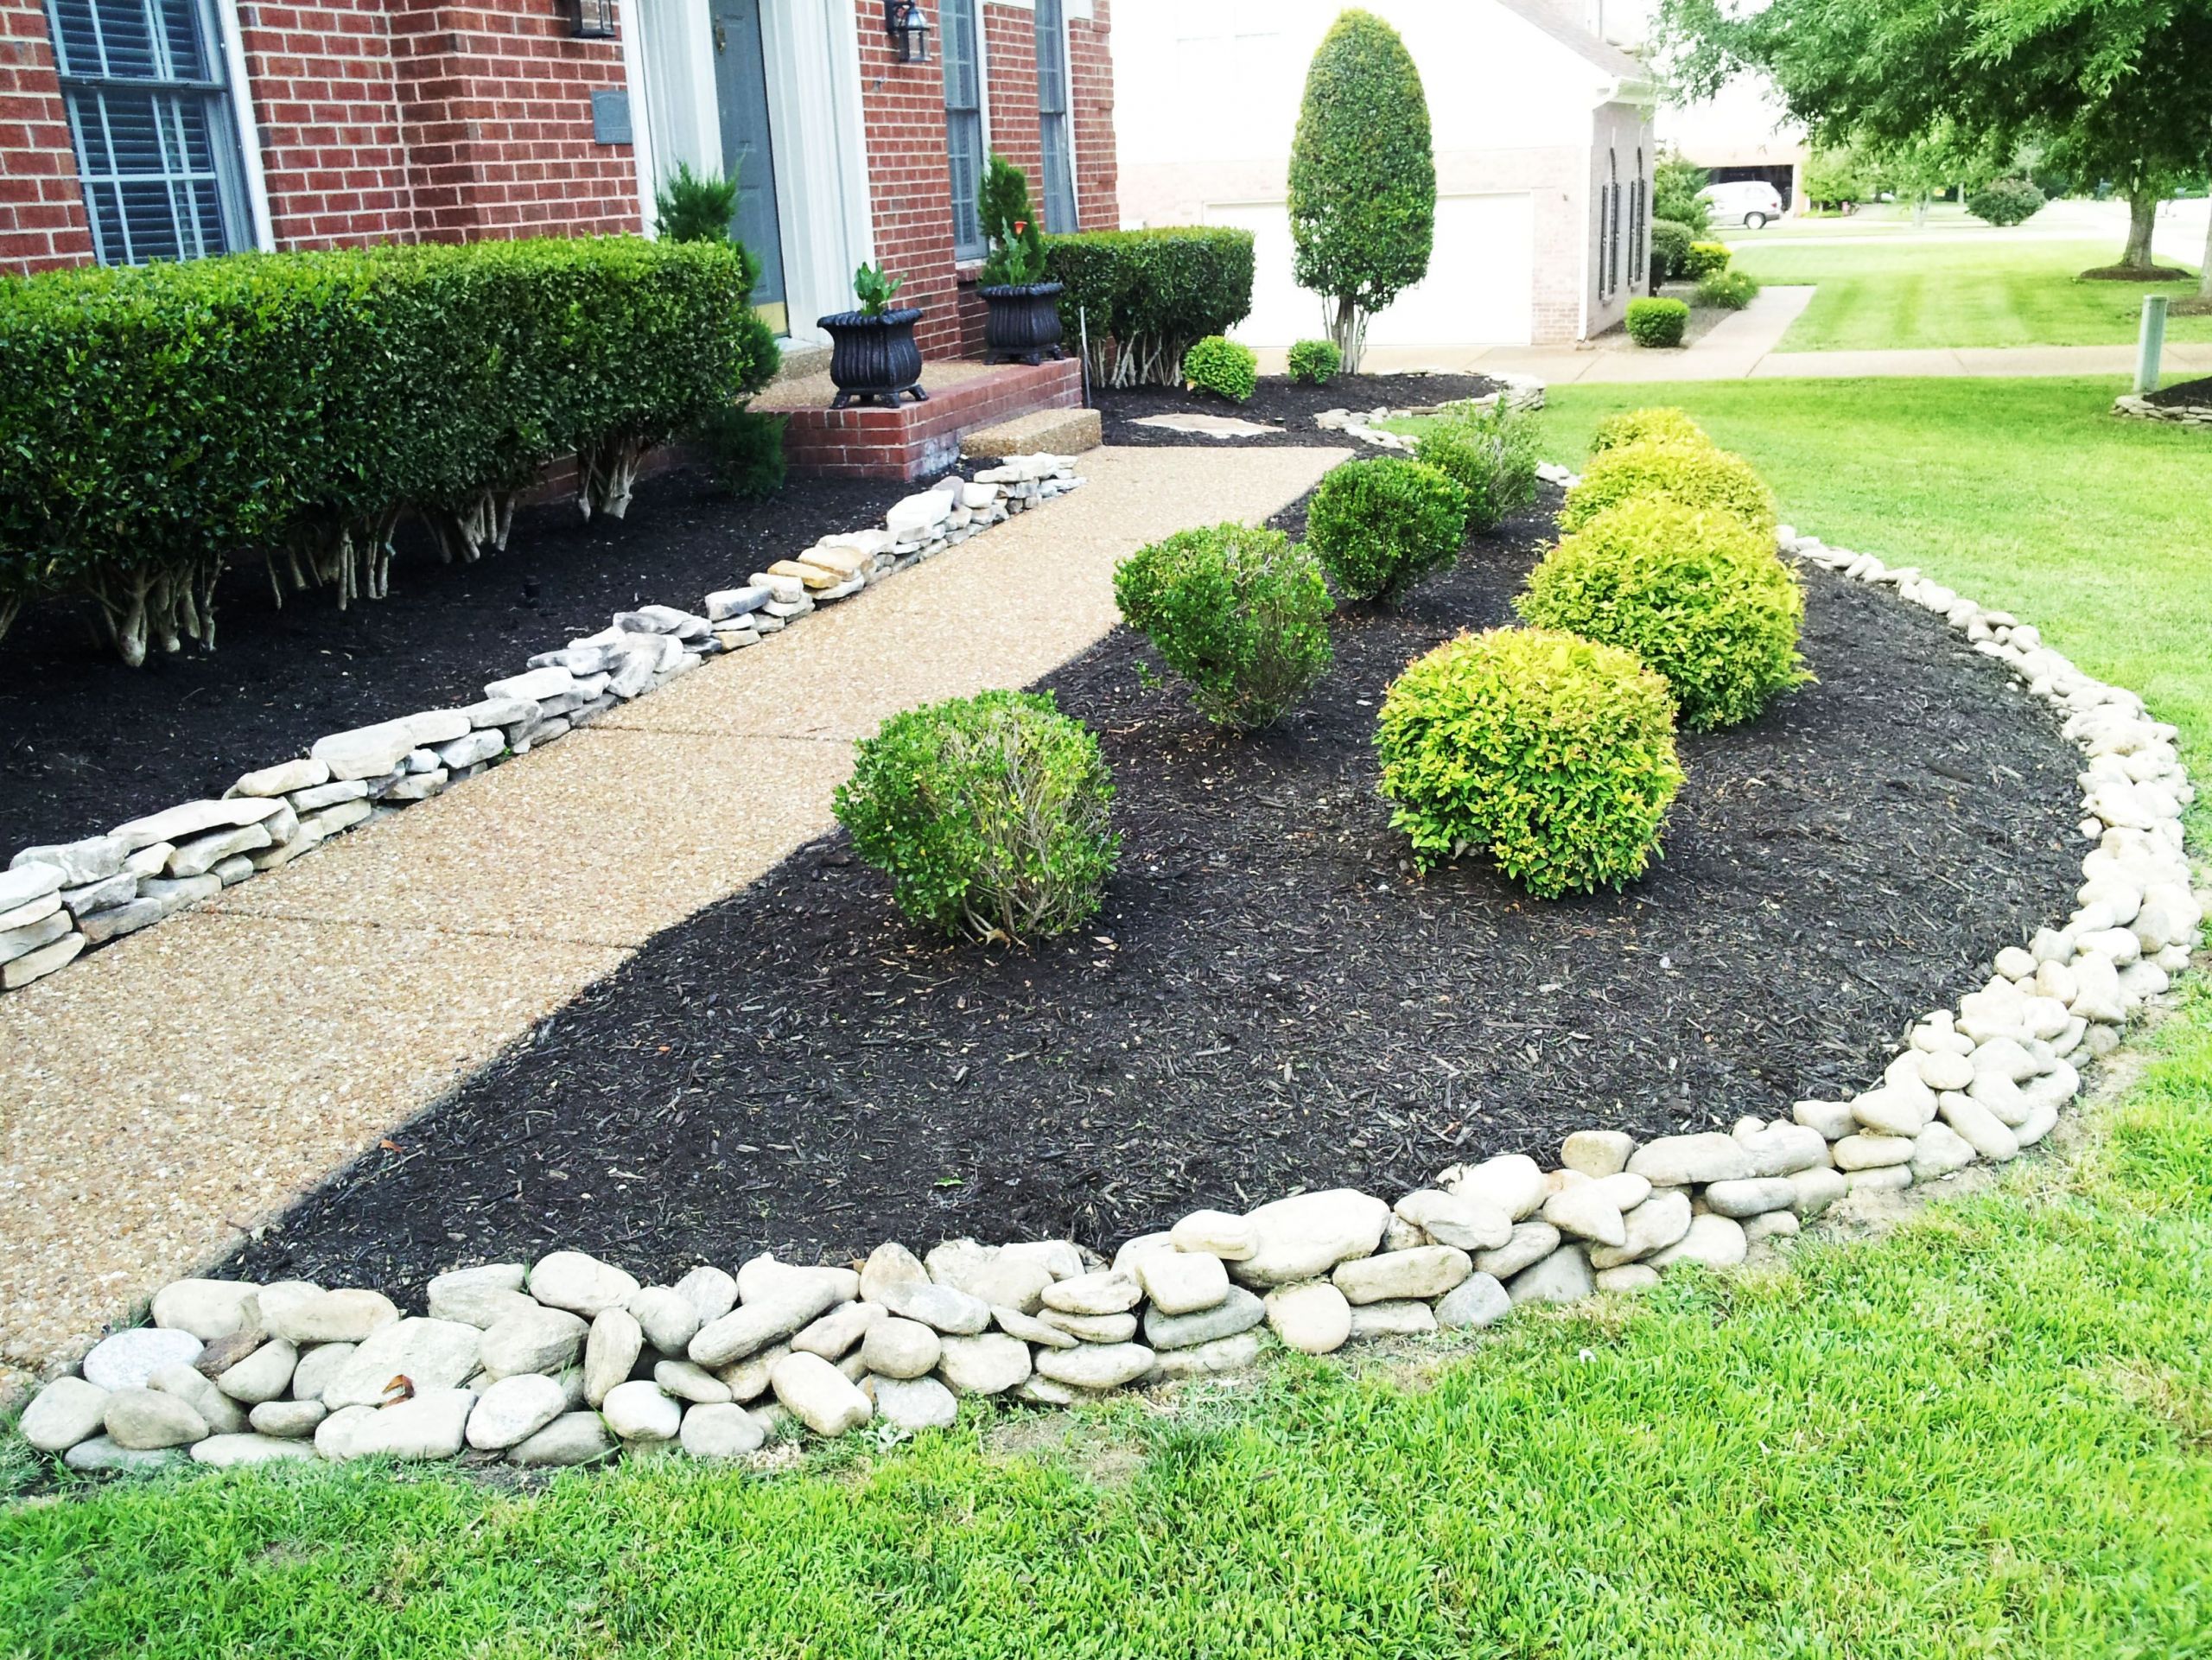 Outdoor Landscape With Rocks
 Decorative Landscaping with Rocks for a Natural House